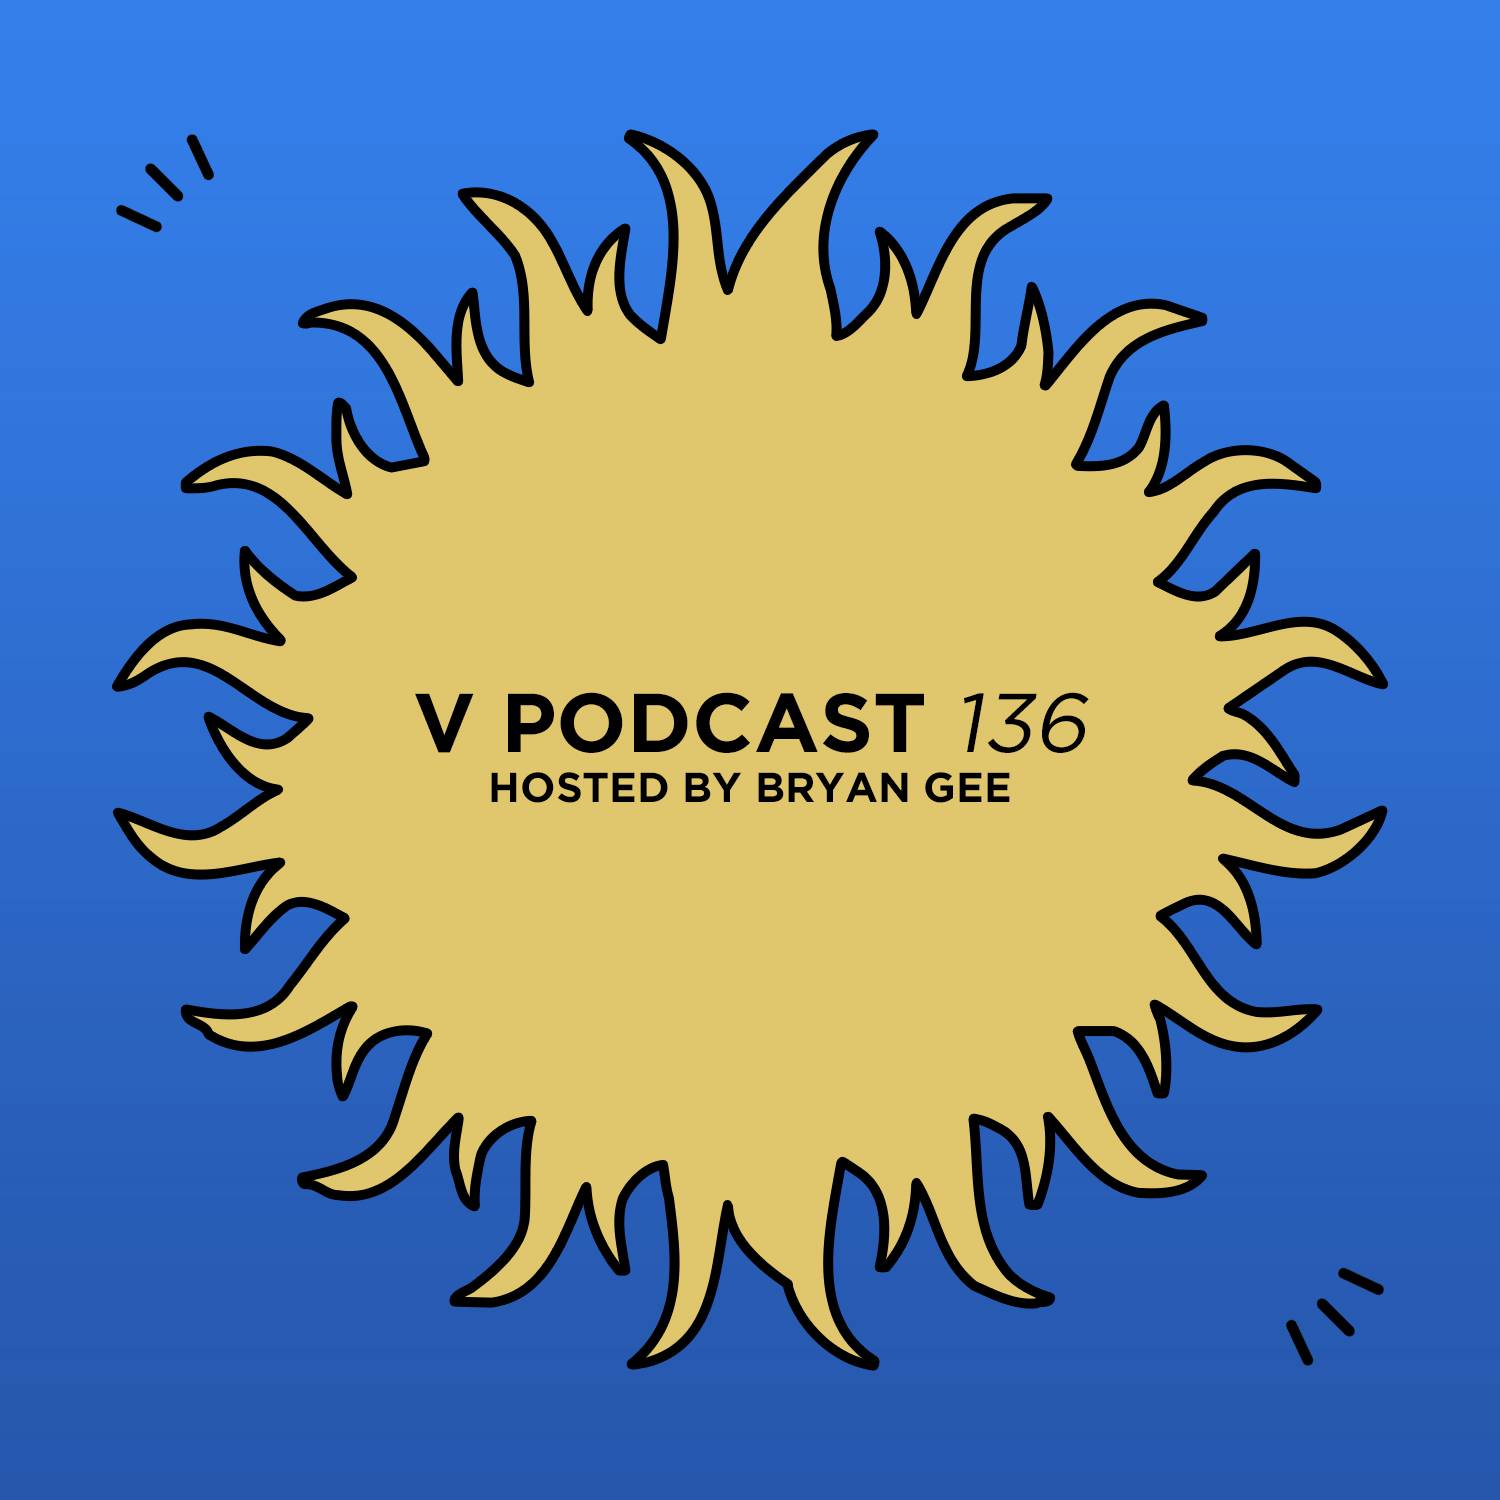 V Podcast 136 - Hosted by Bryan Gee Artwork